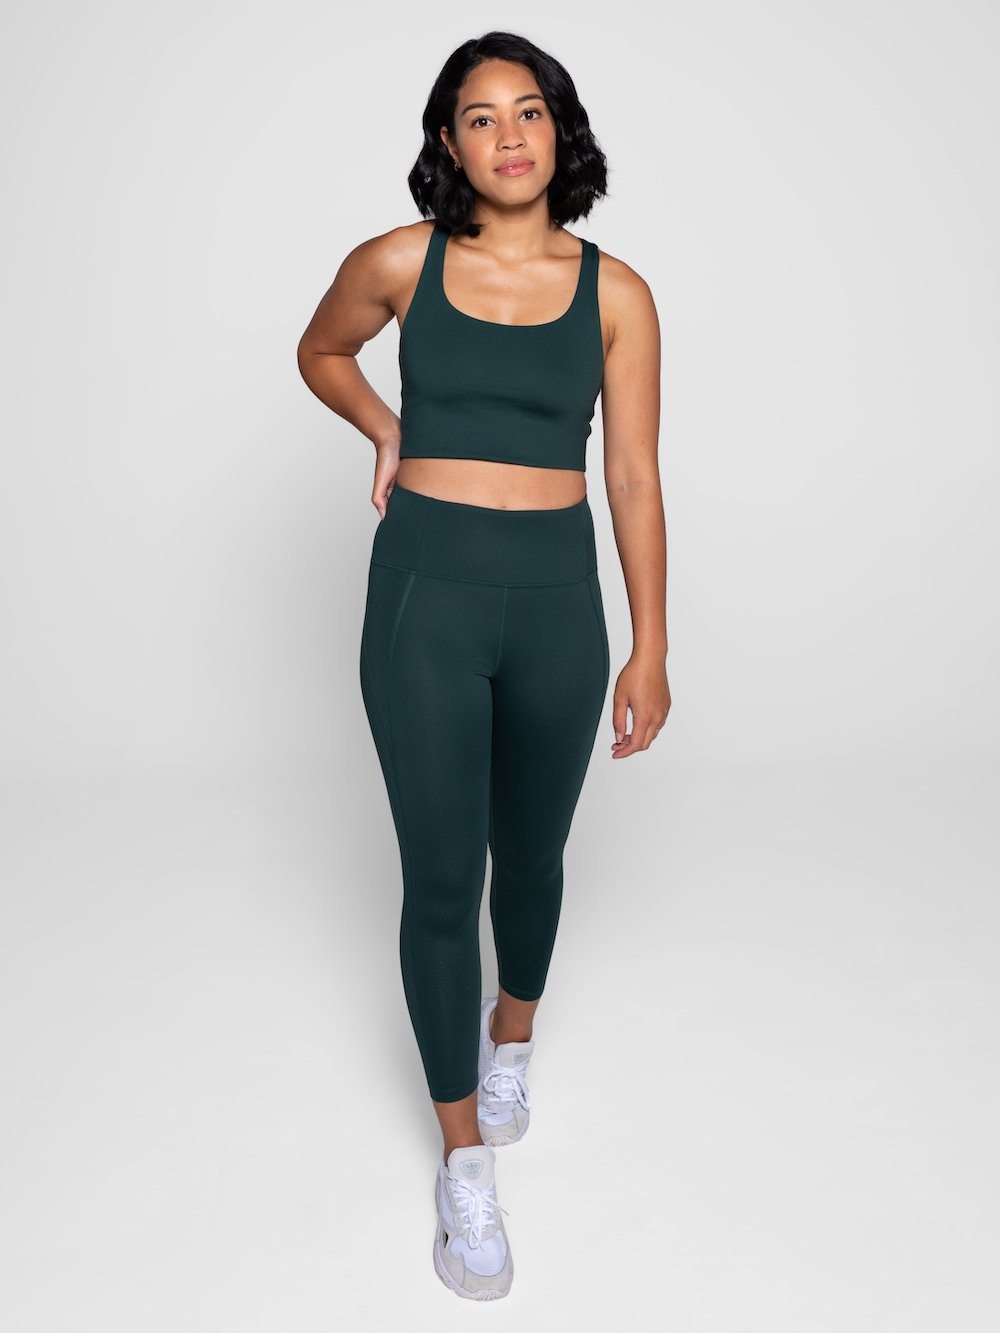 Girlfriend Collective Women\'s Compressive Legging - 7/8 - Made From  Recycled Plastic Bottles – Weekendbee - sustainable sportswear